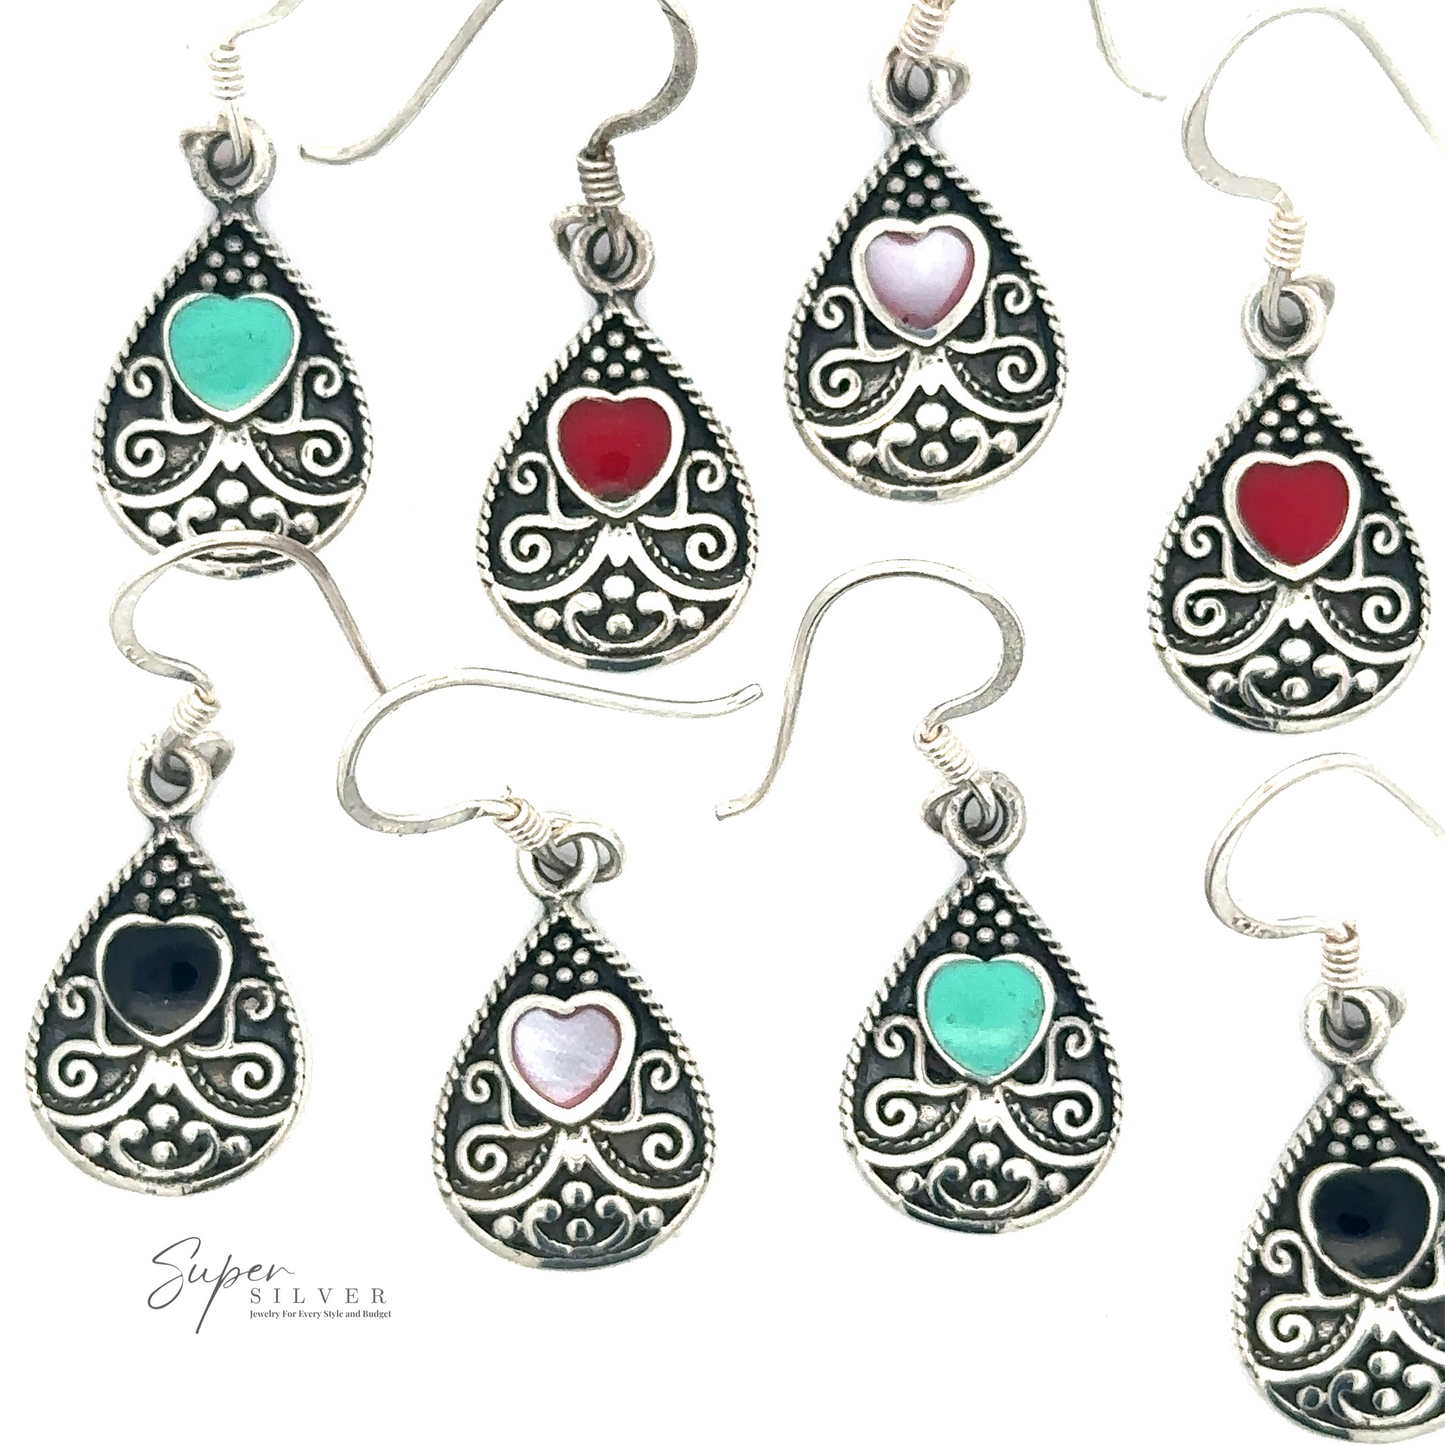 A collection of nine intricate Bali Style Teardrop Earrings with Inlaid Stone in various colors. The earrings feature ornate sterling silver details and dangle hooks. Logo reads "Super Silver.